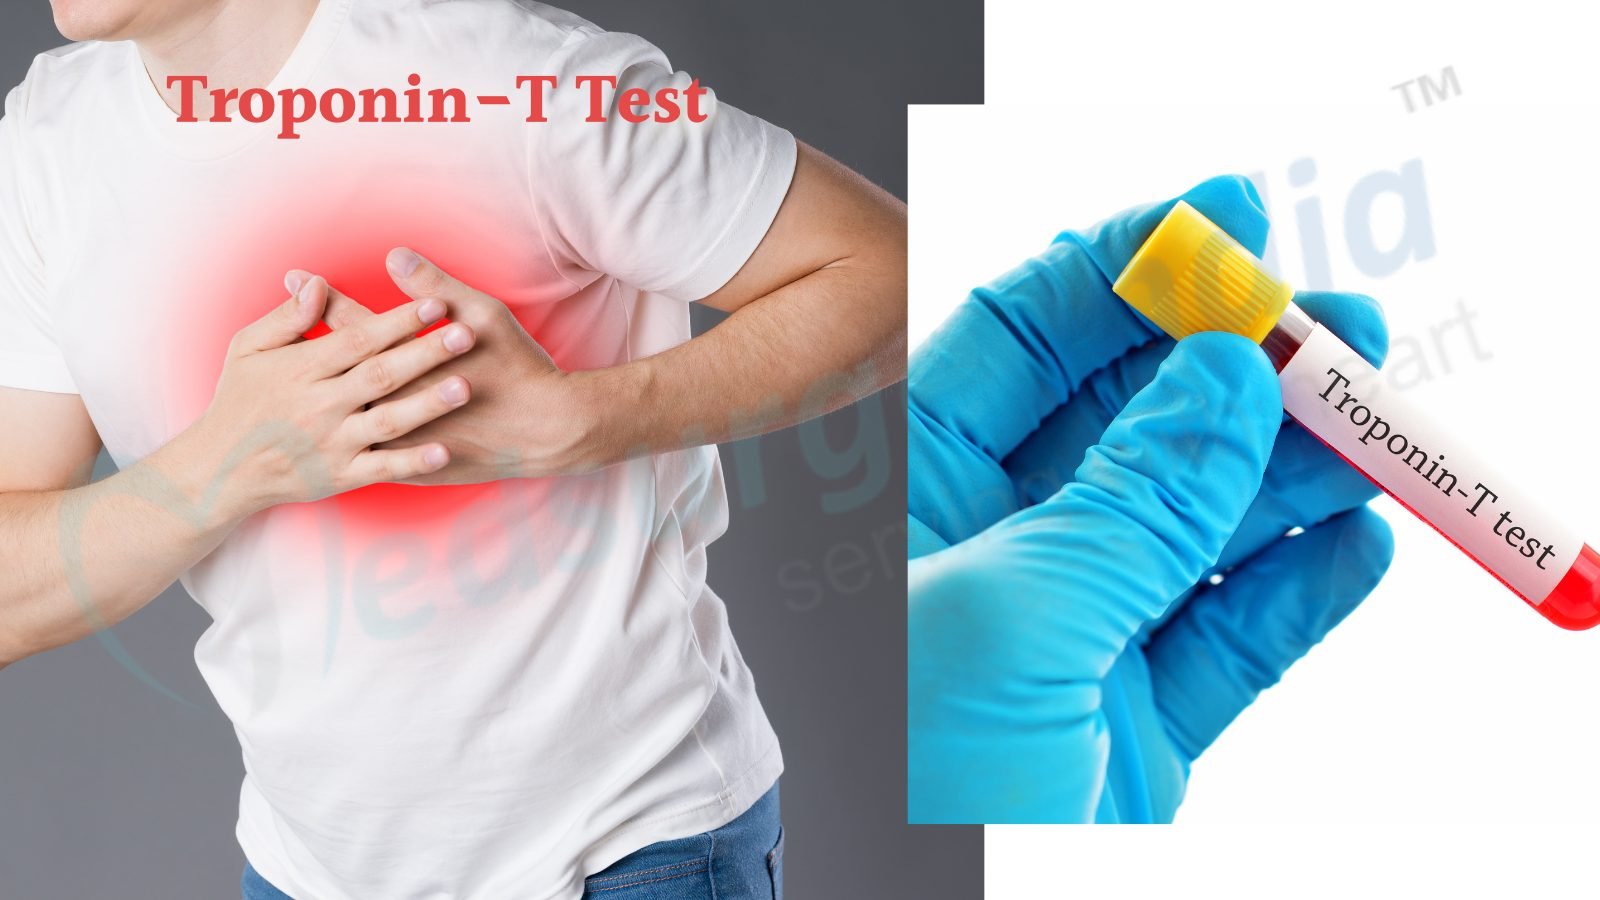 What Level of Troponin Indicates Heart Attack?